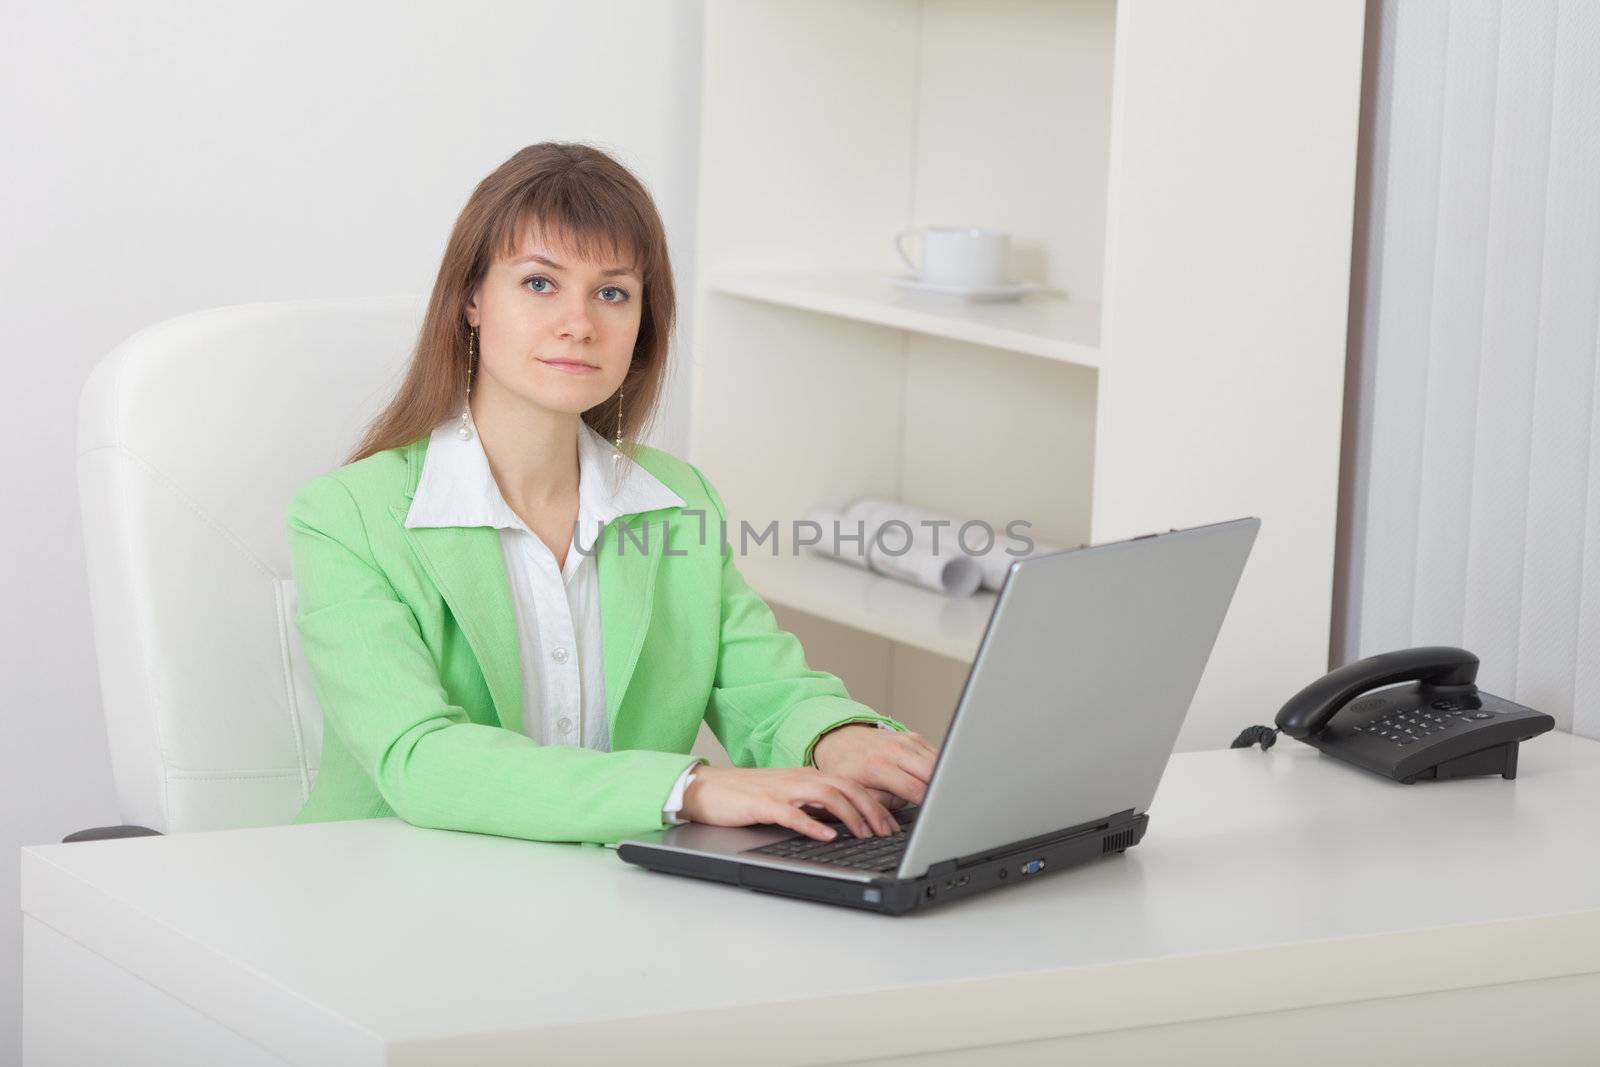 The young beautiful woman - the secretary sits on a workplace with the computer